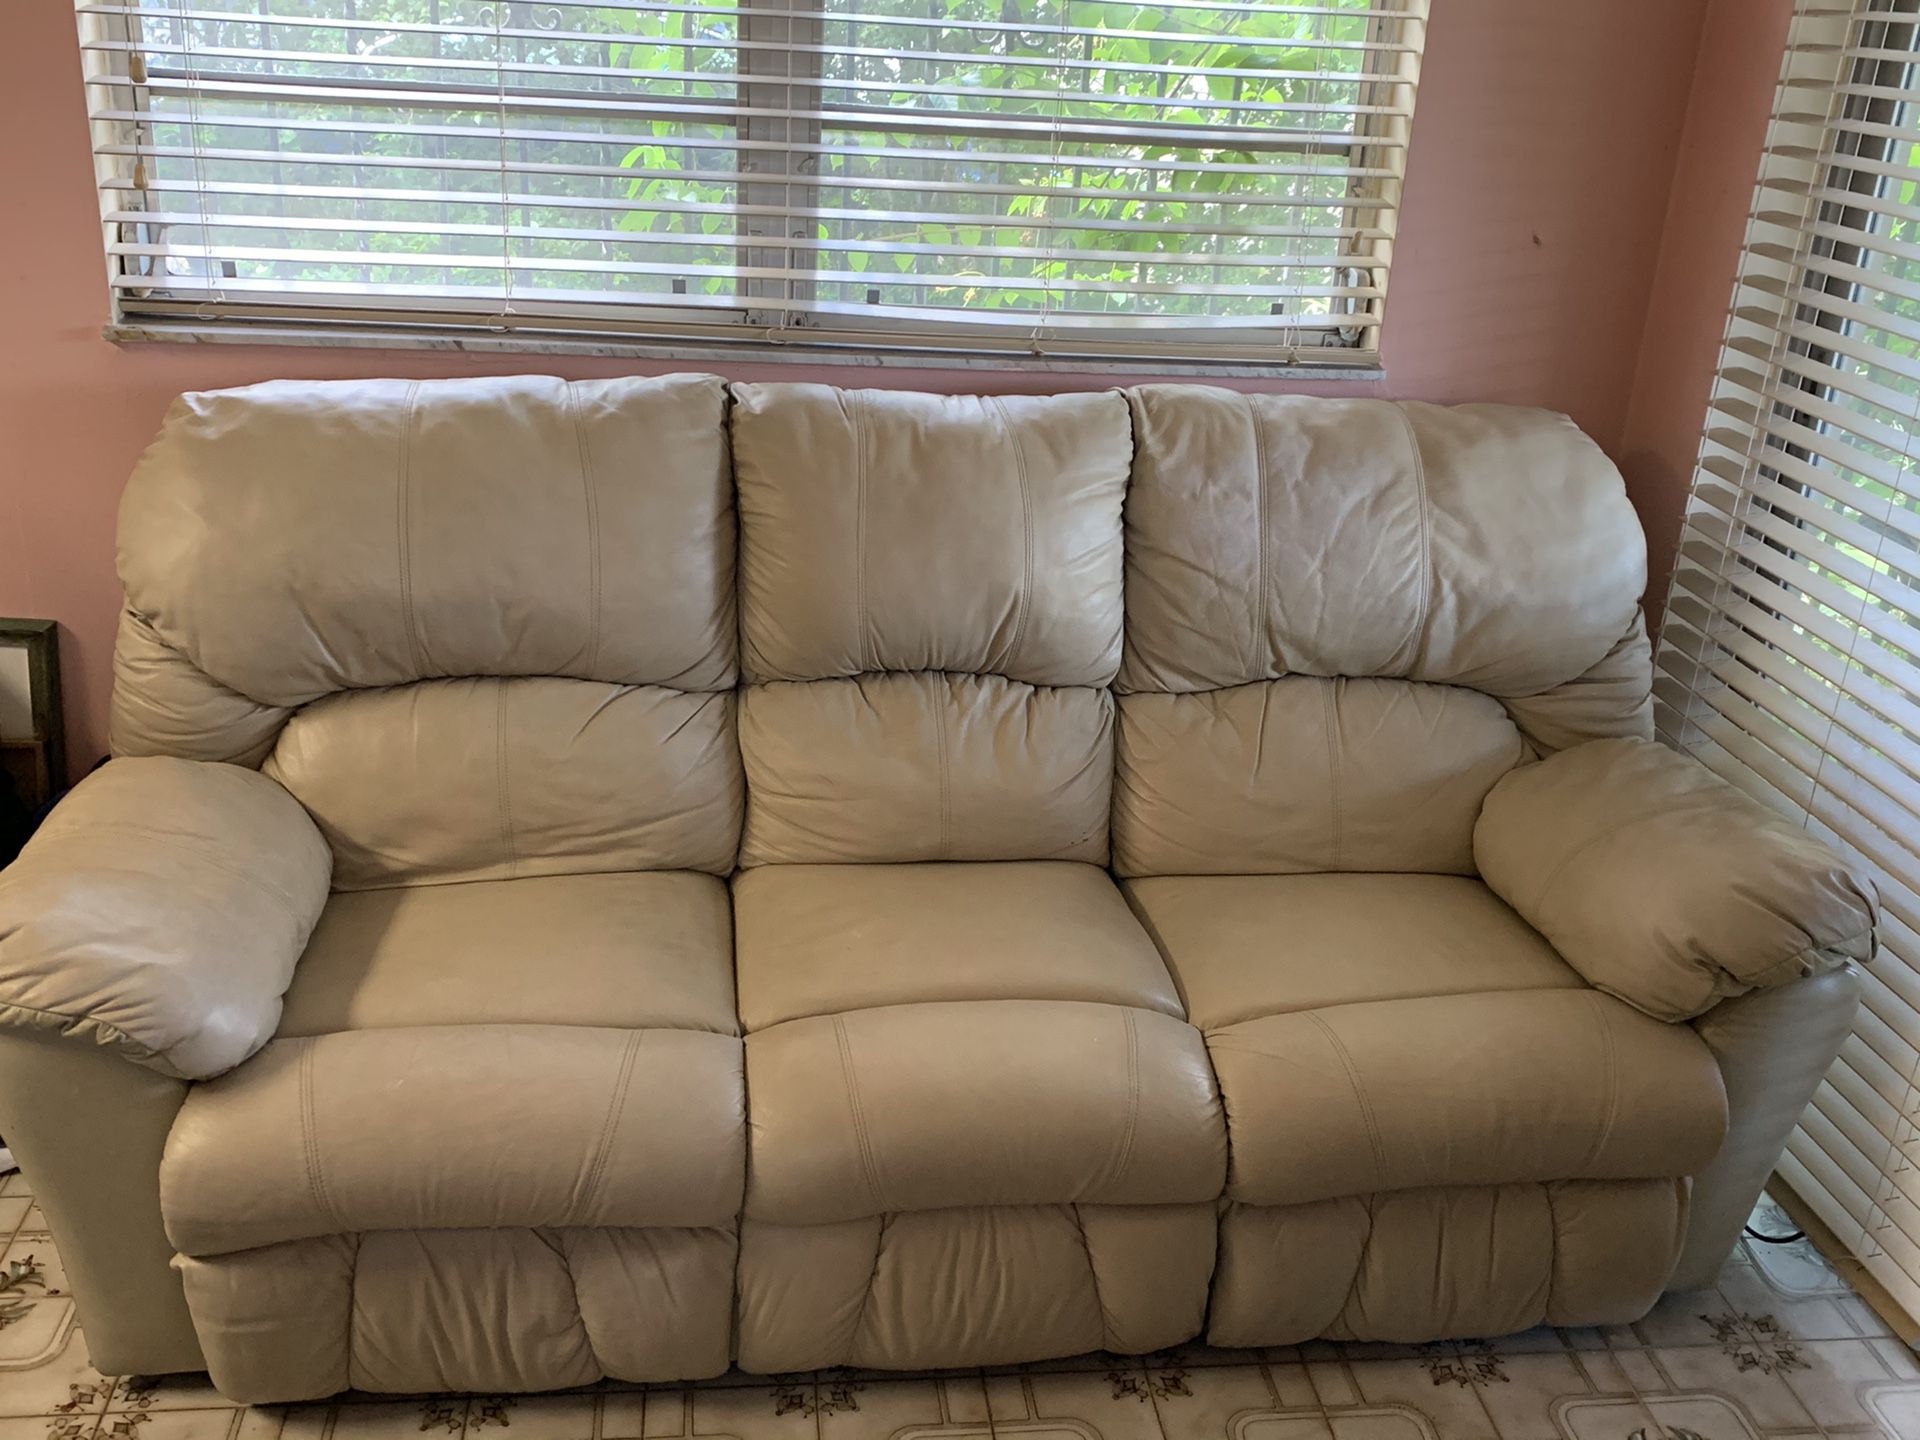 Rooms To Go 3-Piece Leather Sofa Recliner in Taupe. Excellent condition! Recliner on each end of the sofa Super super comfortable!!